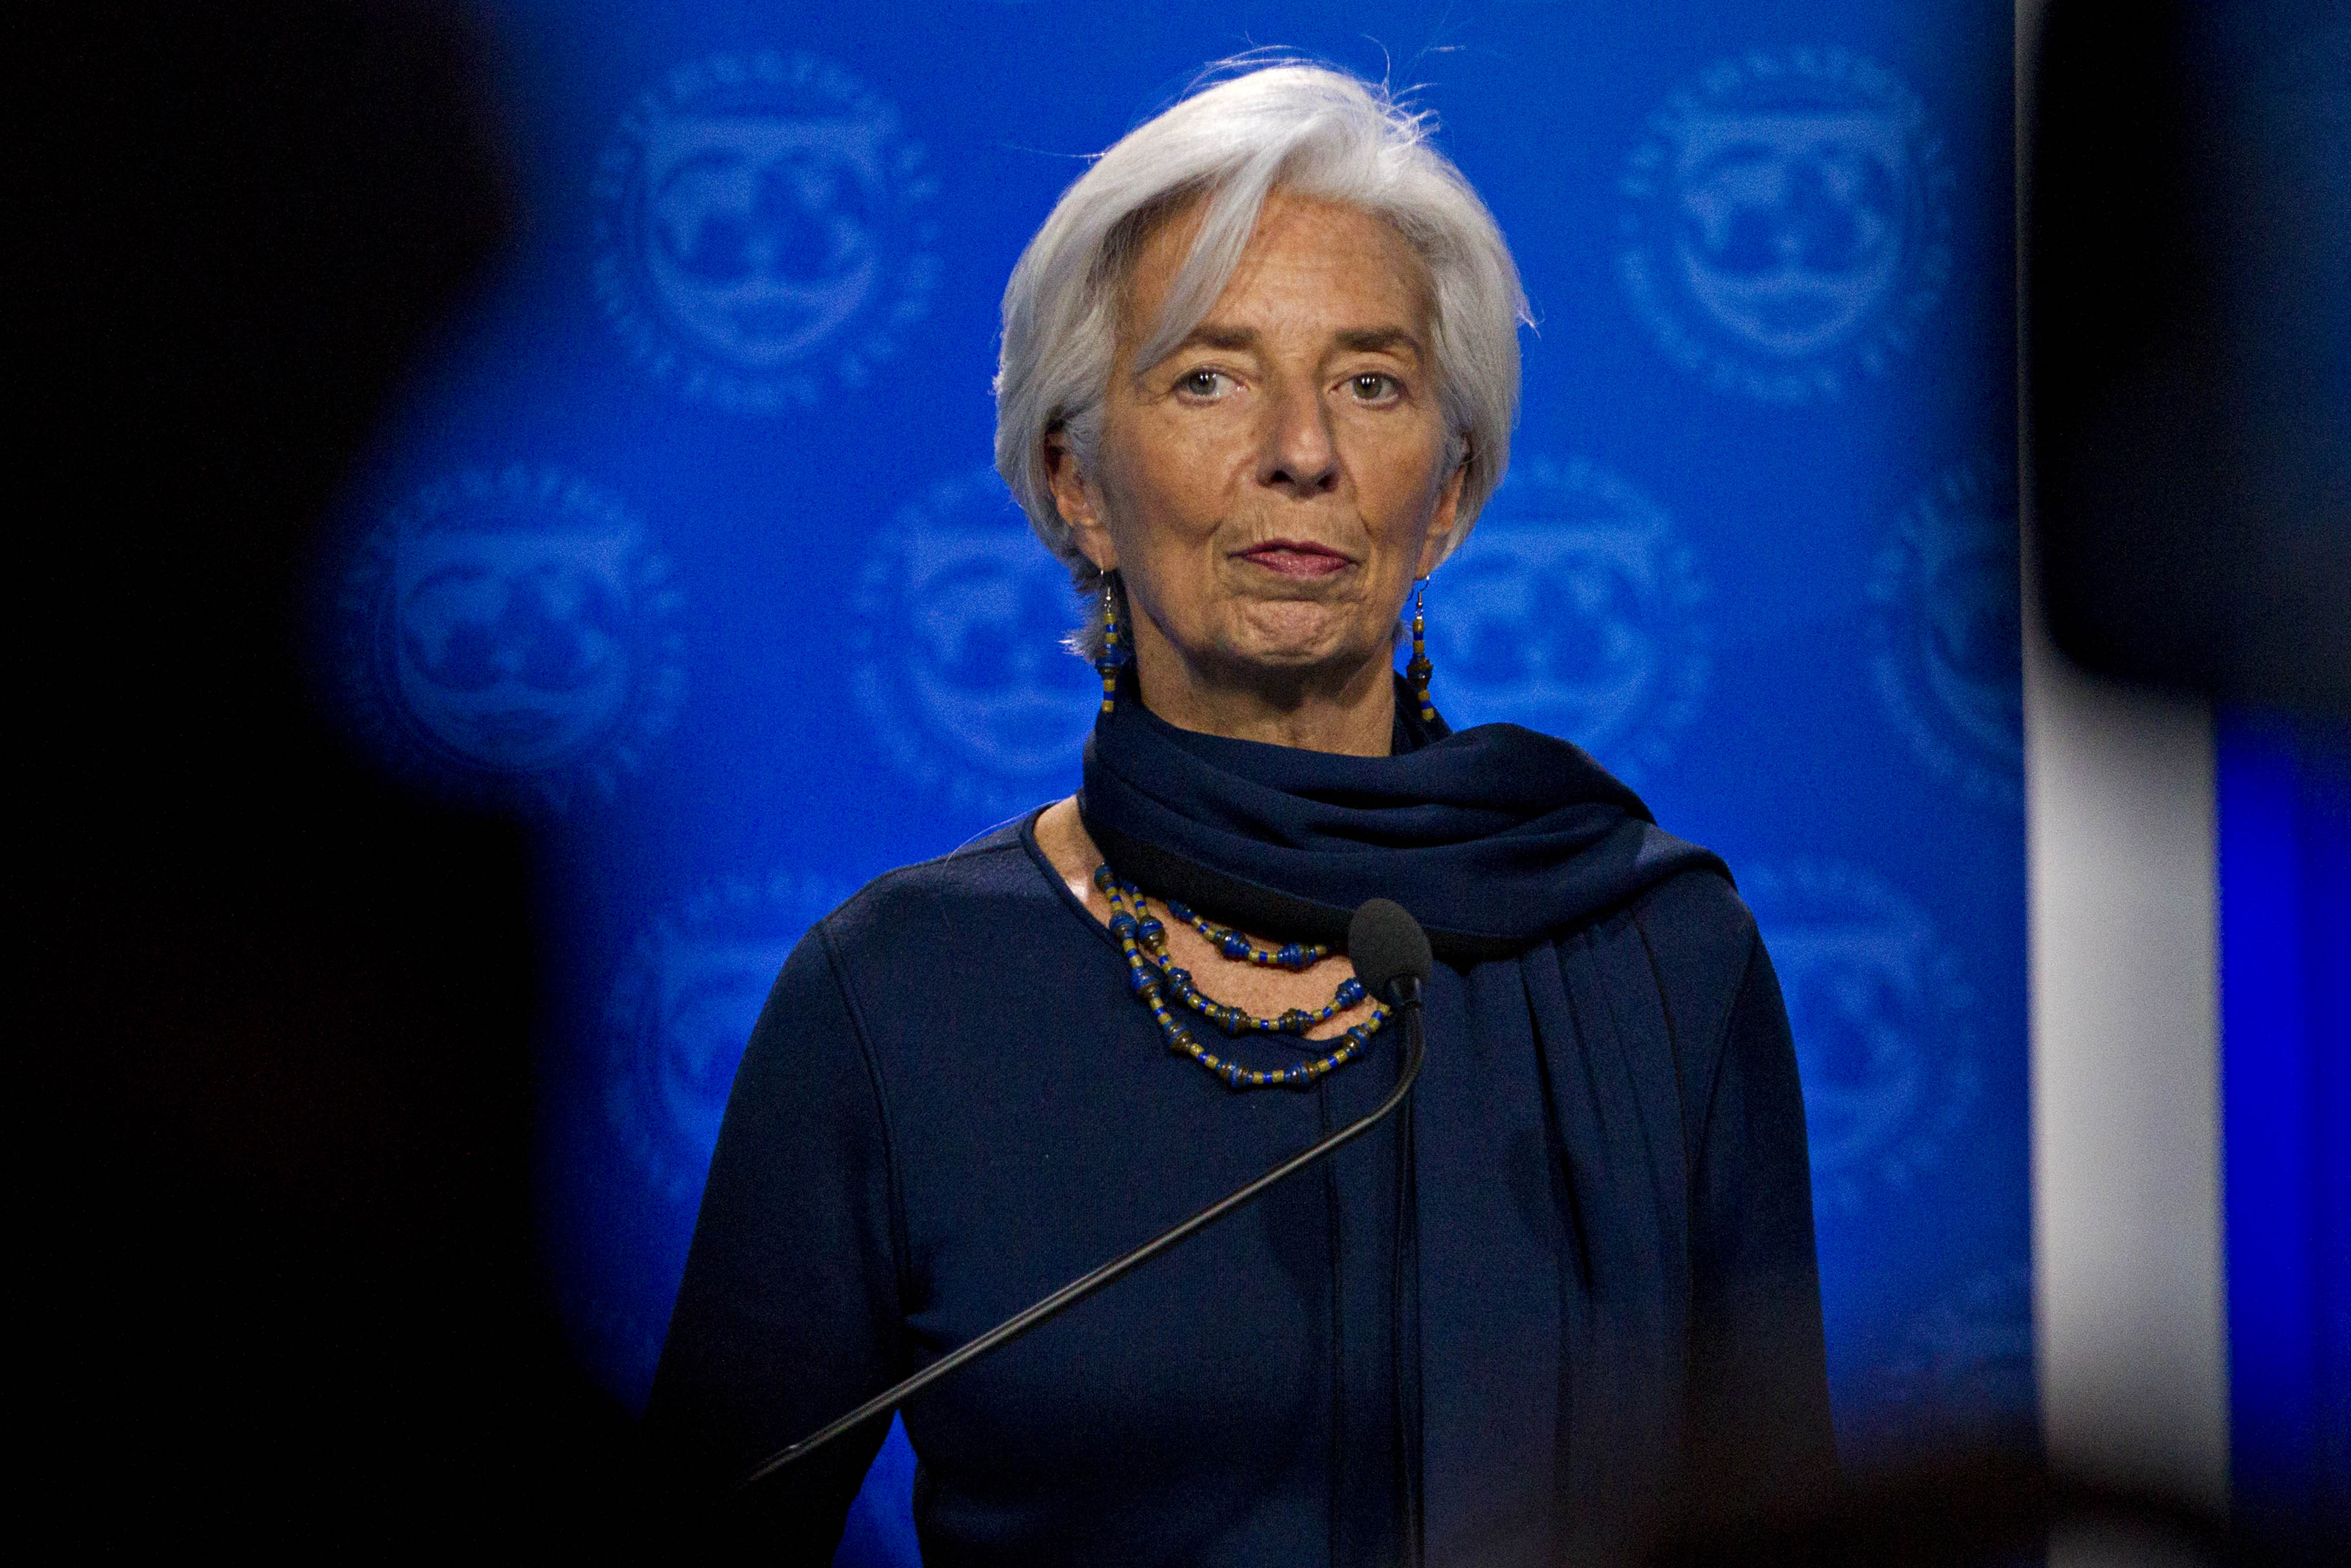 ECB has every reason not to act as fast as Fed, Lagarde says